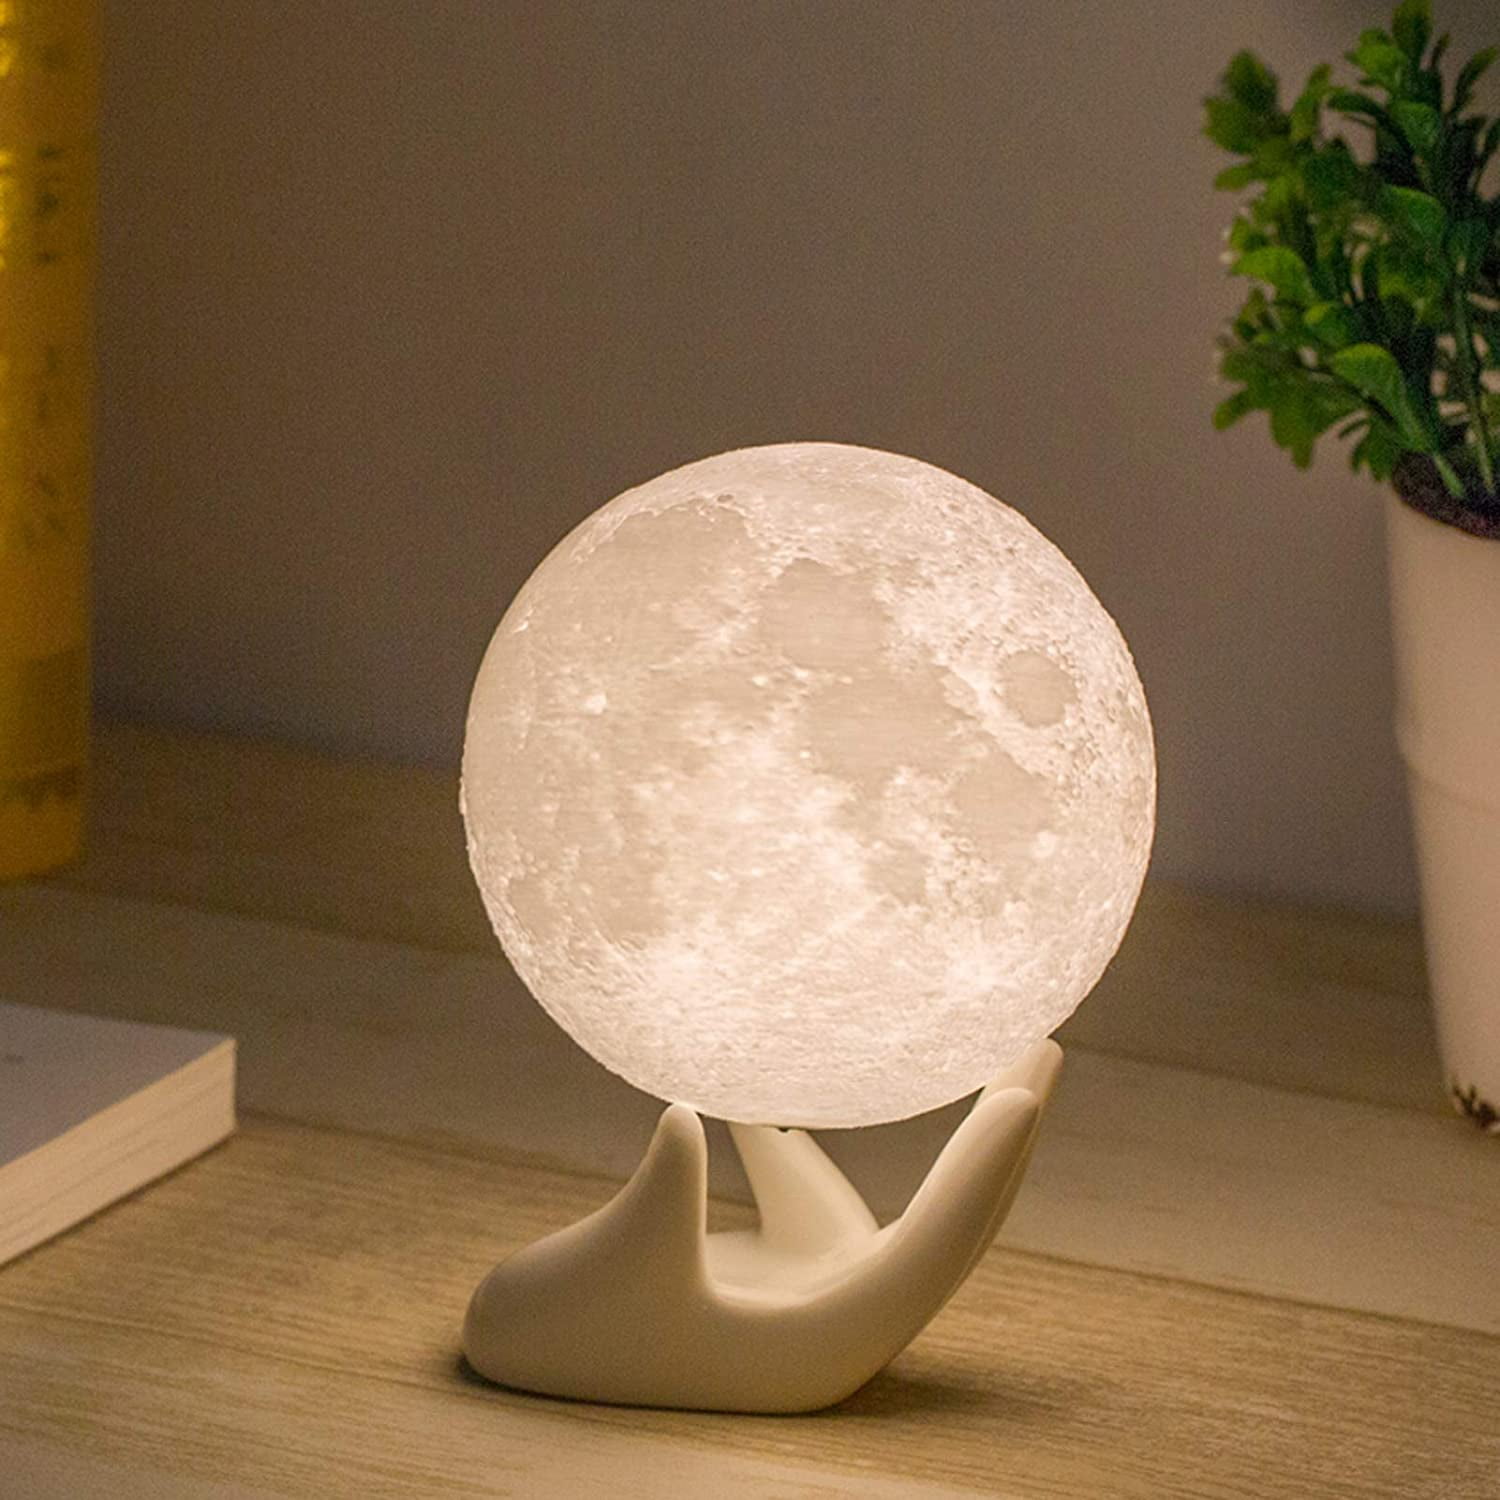 Dimmable 3D Magical Moon Lamp USB LED Night Light Moonlight Touch Sensor Gift 